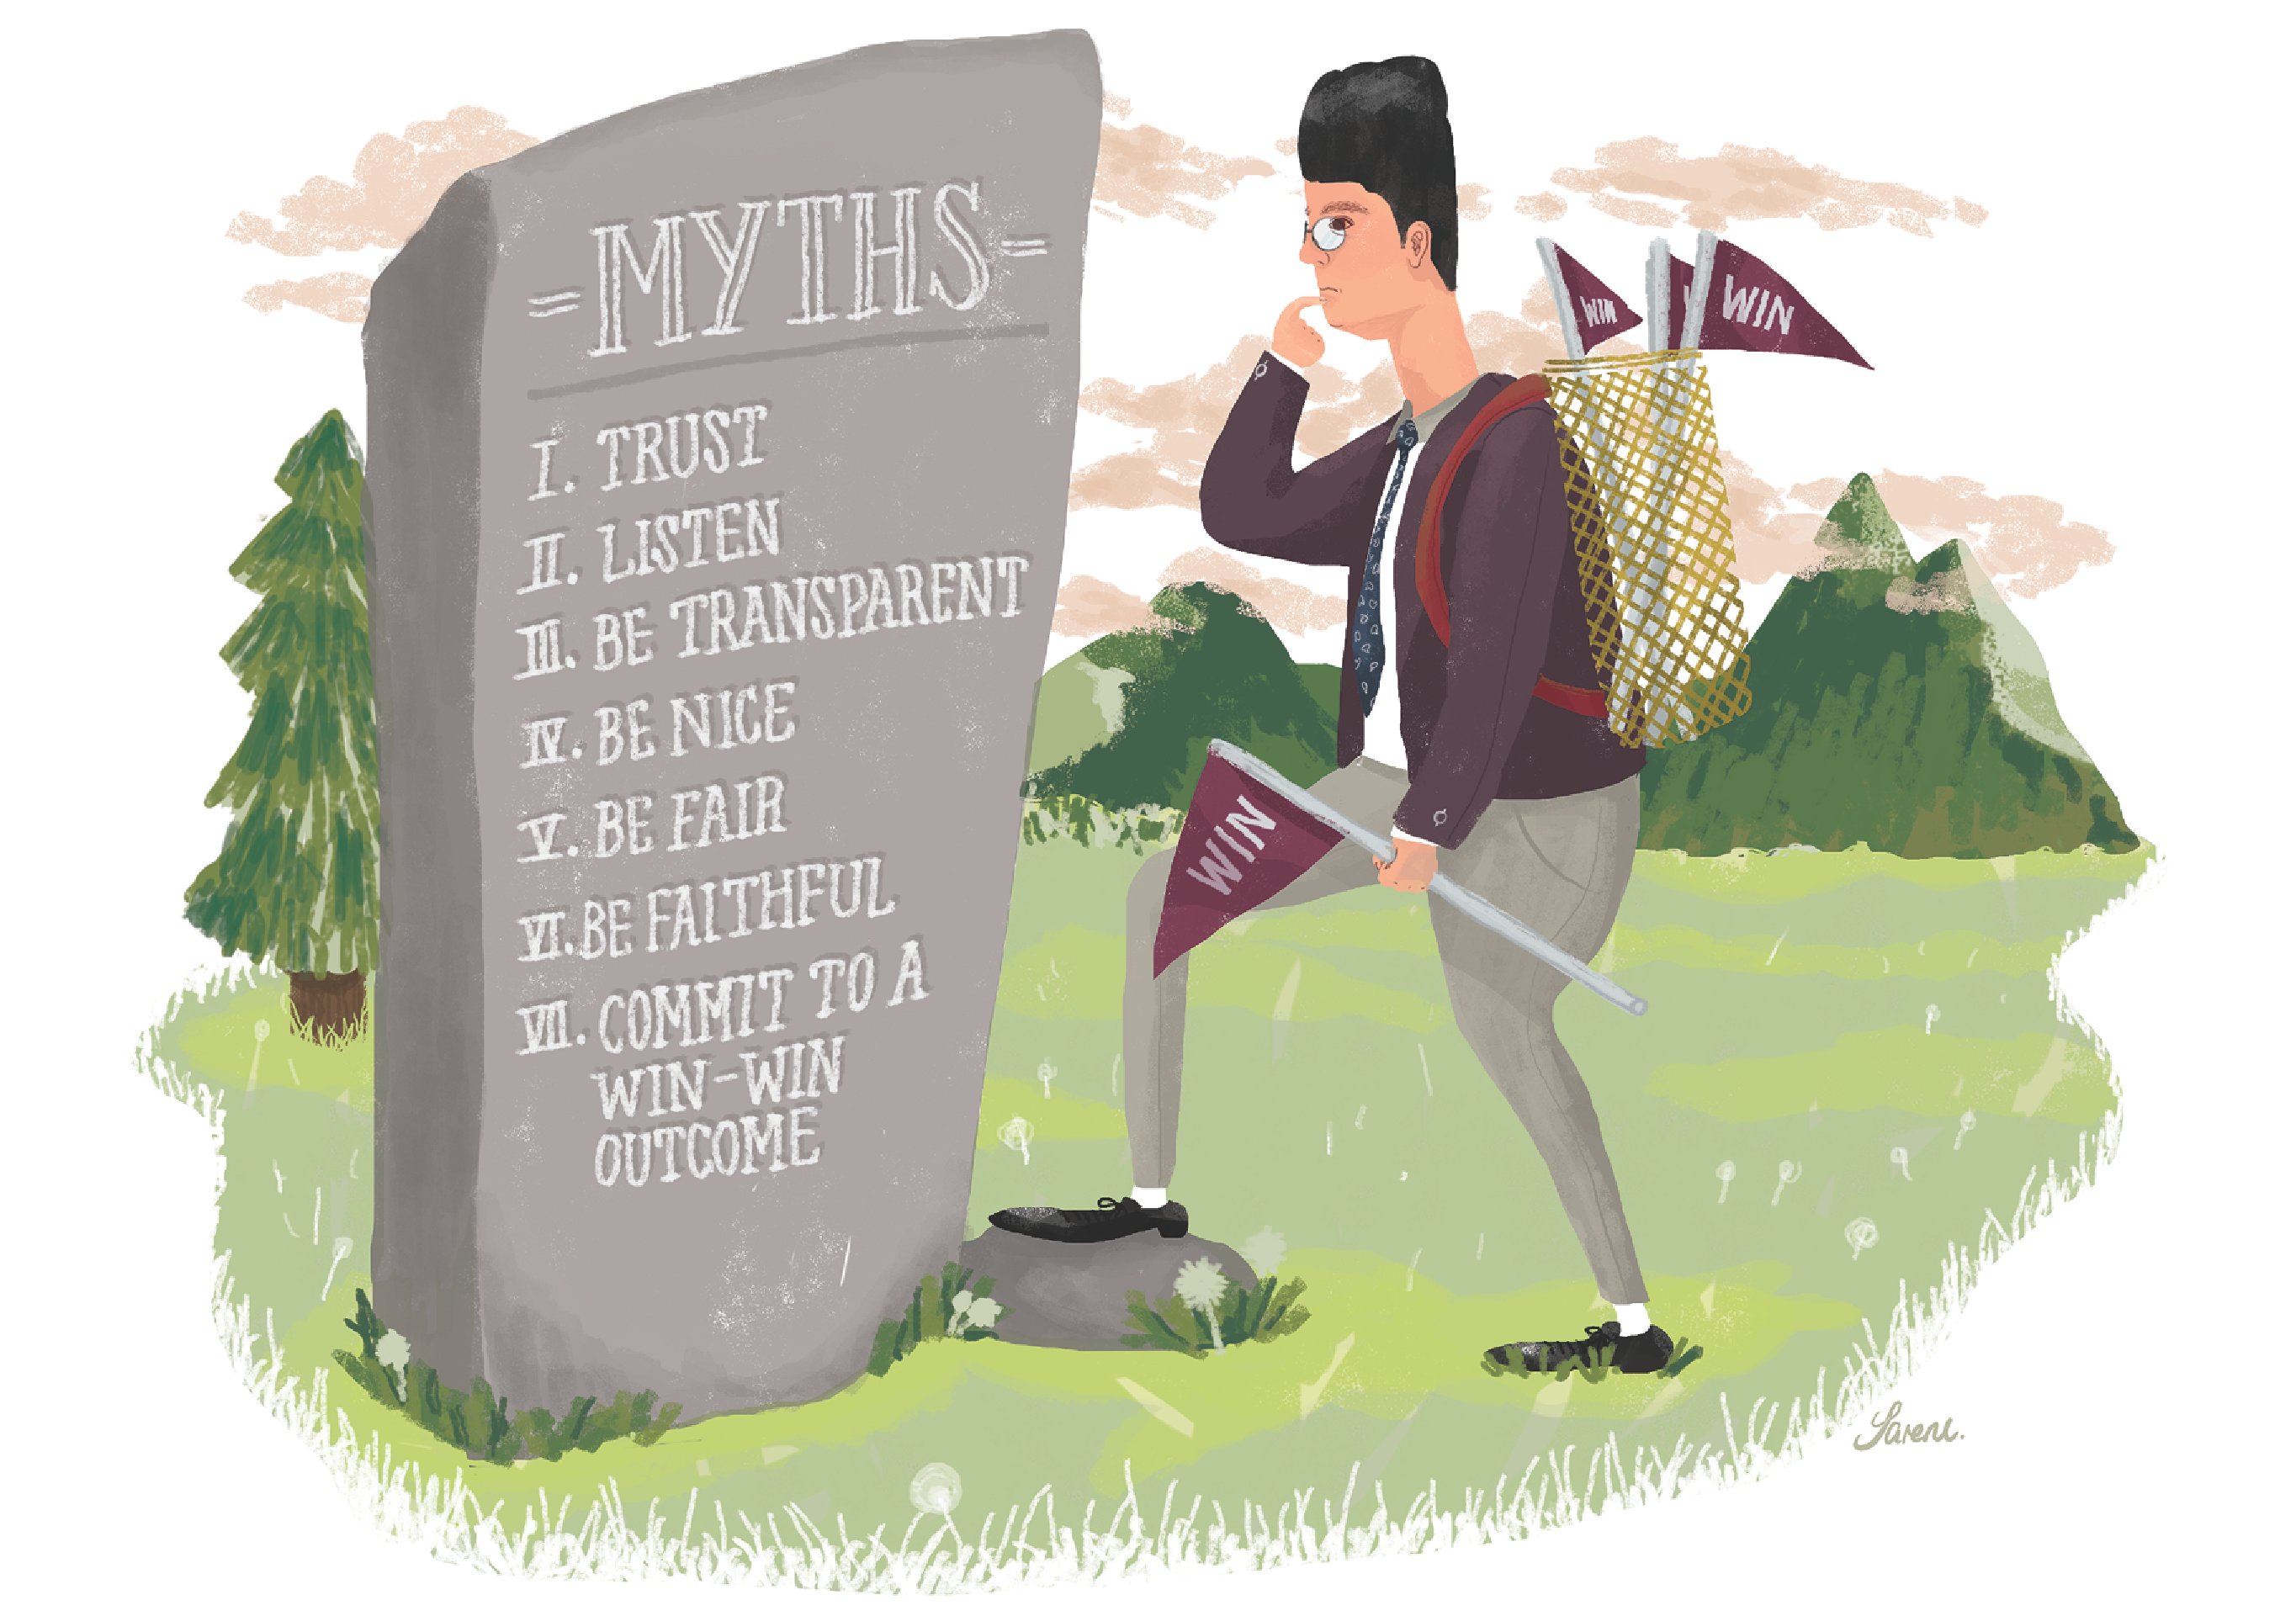 Relying on myths could weaken the position of a  negotiator seeking a win-win outcome. Illustration: Sarene Chan